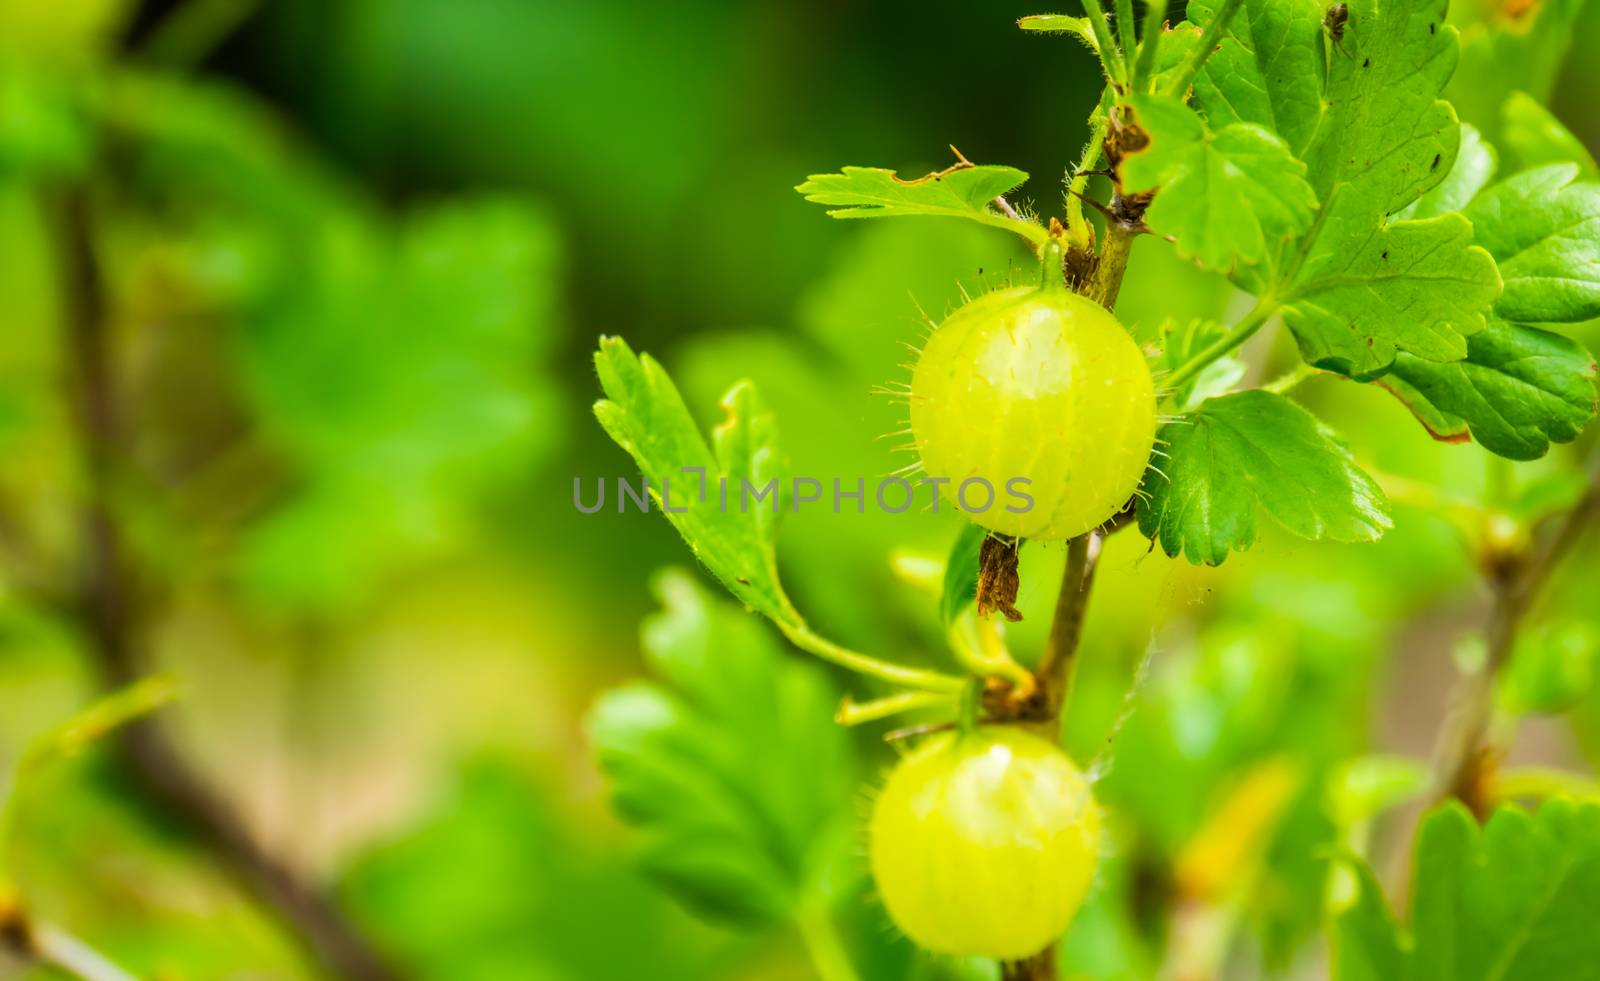 gooseberries on a gooseberry plant in closeup, popular fruiting plant specie from Europe and Africa